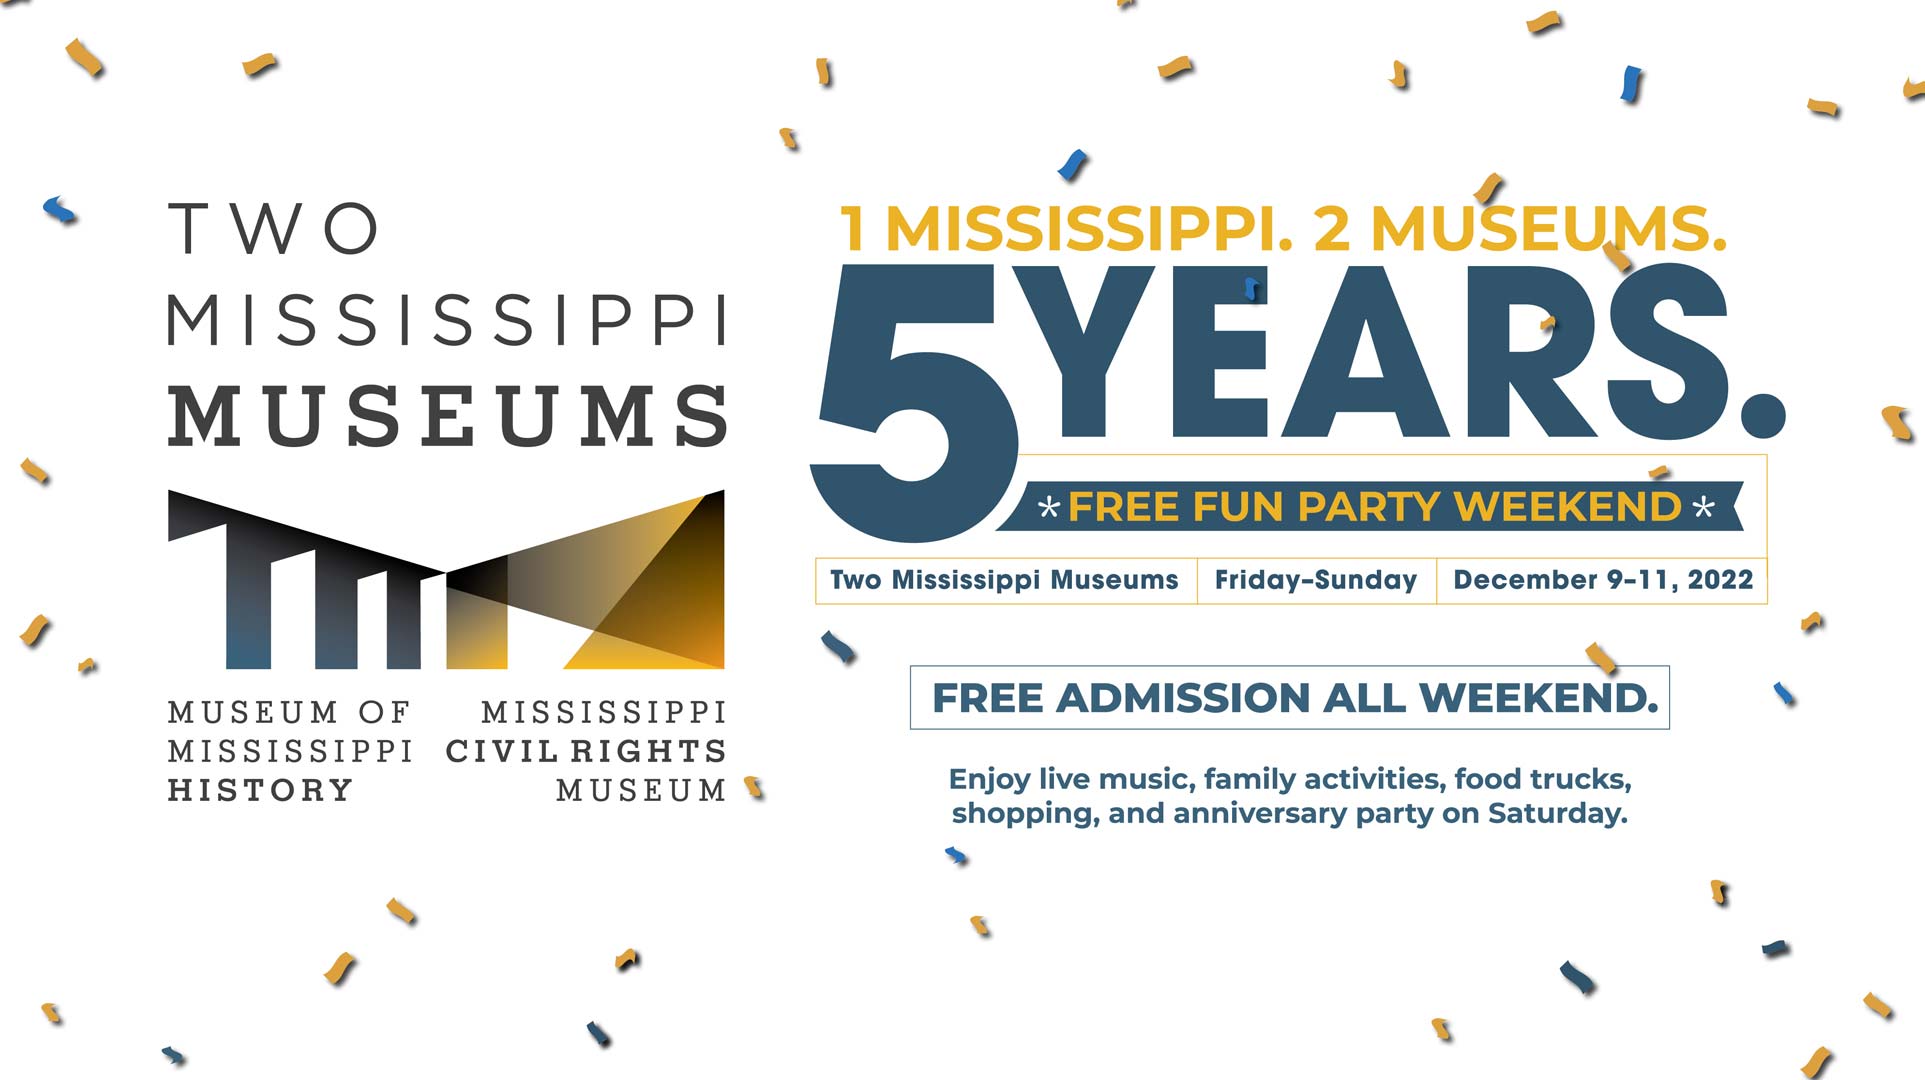 Two Mississippi Museums 5 Year Anniversary Free Fun Party Weekend December 9-11, 2022